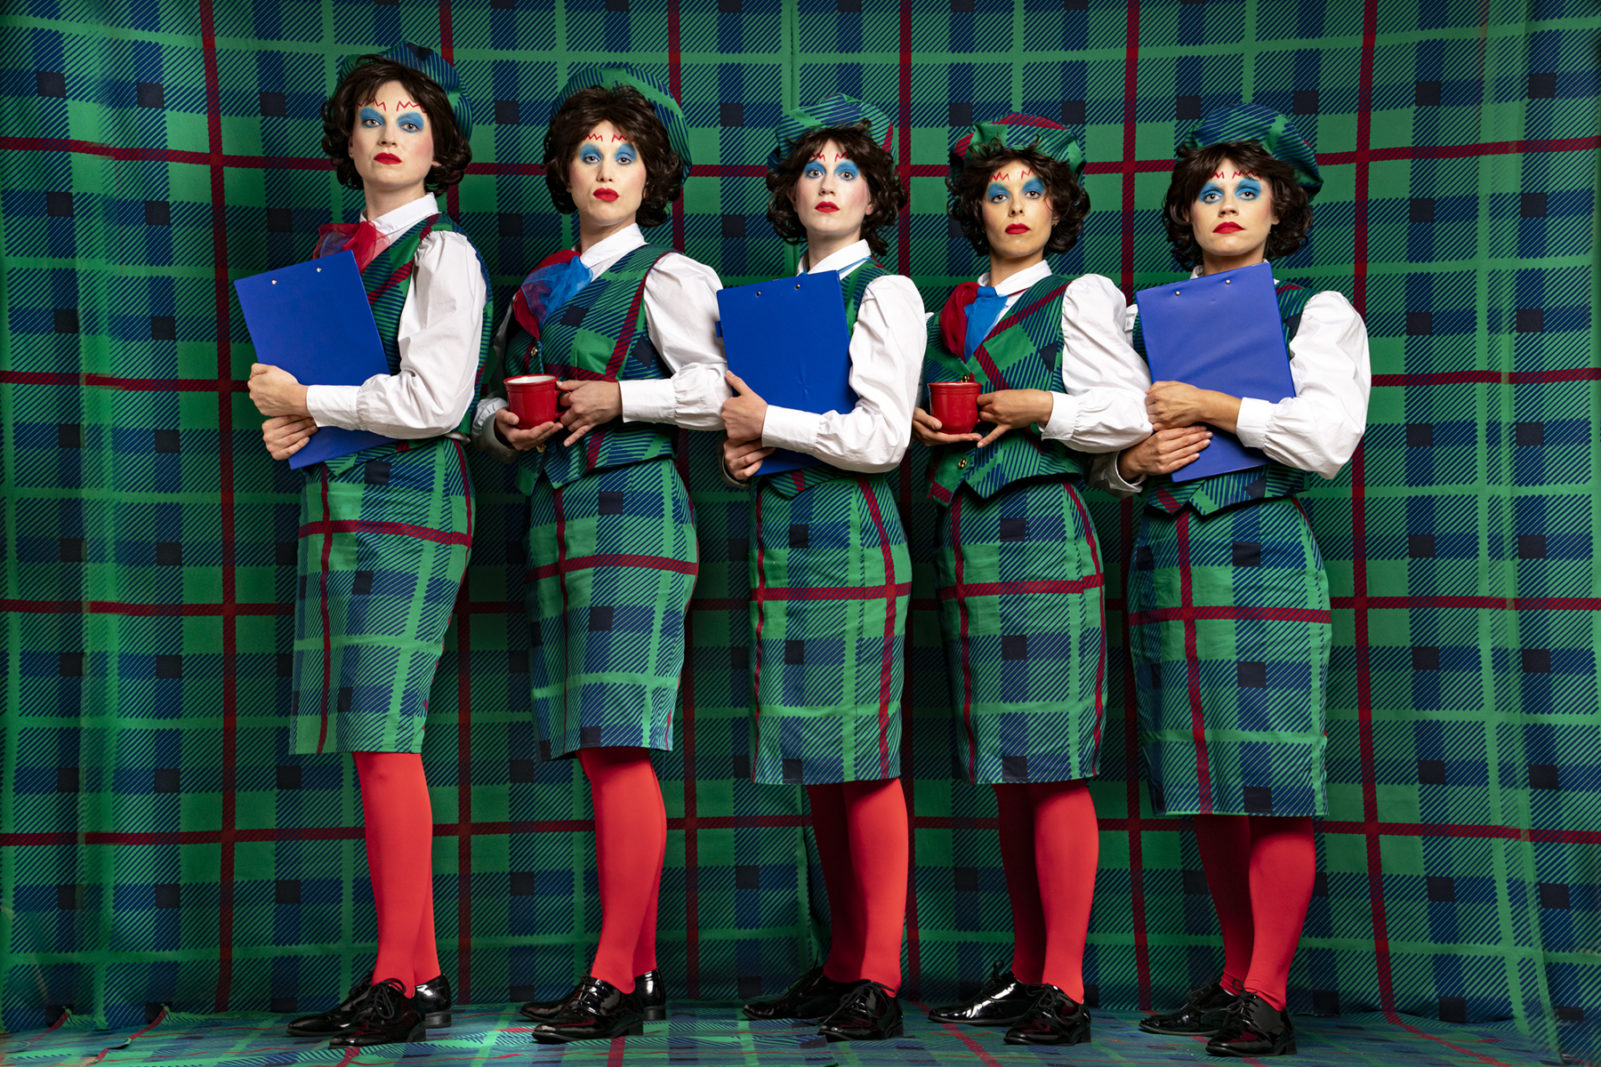 The artists dressed in tartan on a tartan background, with dramatic make up and stern facial expressions.